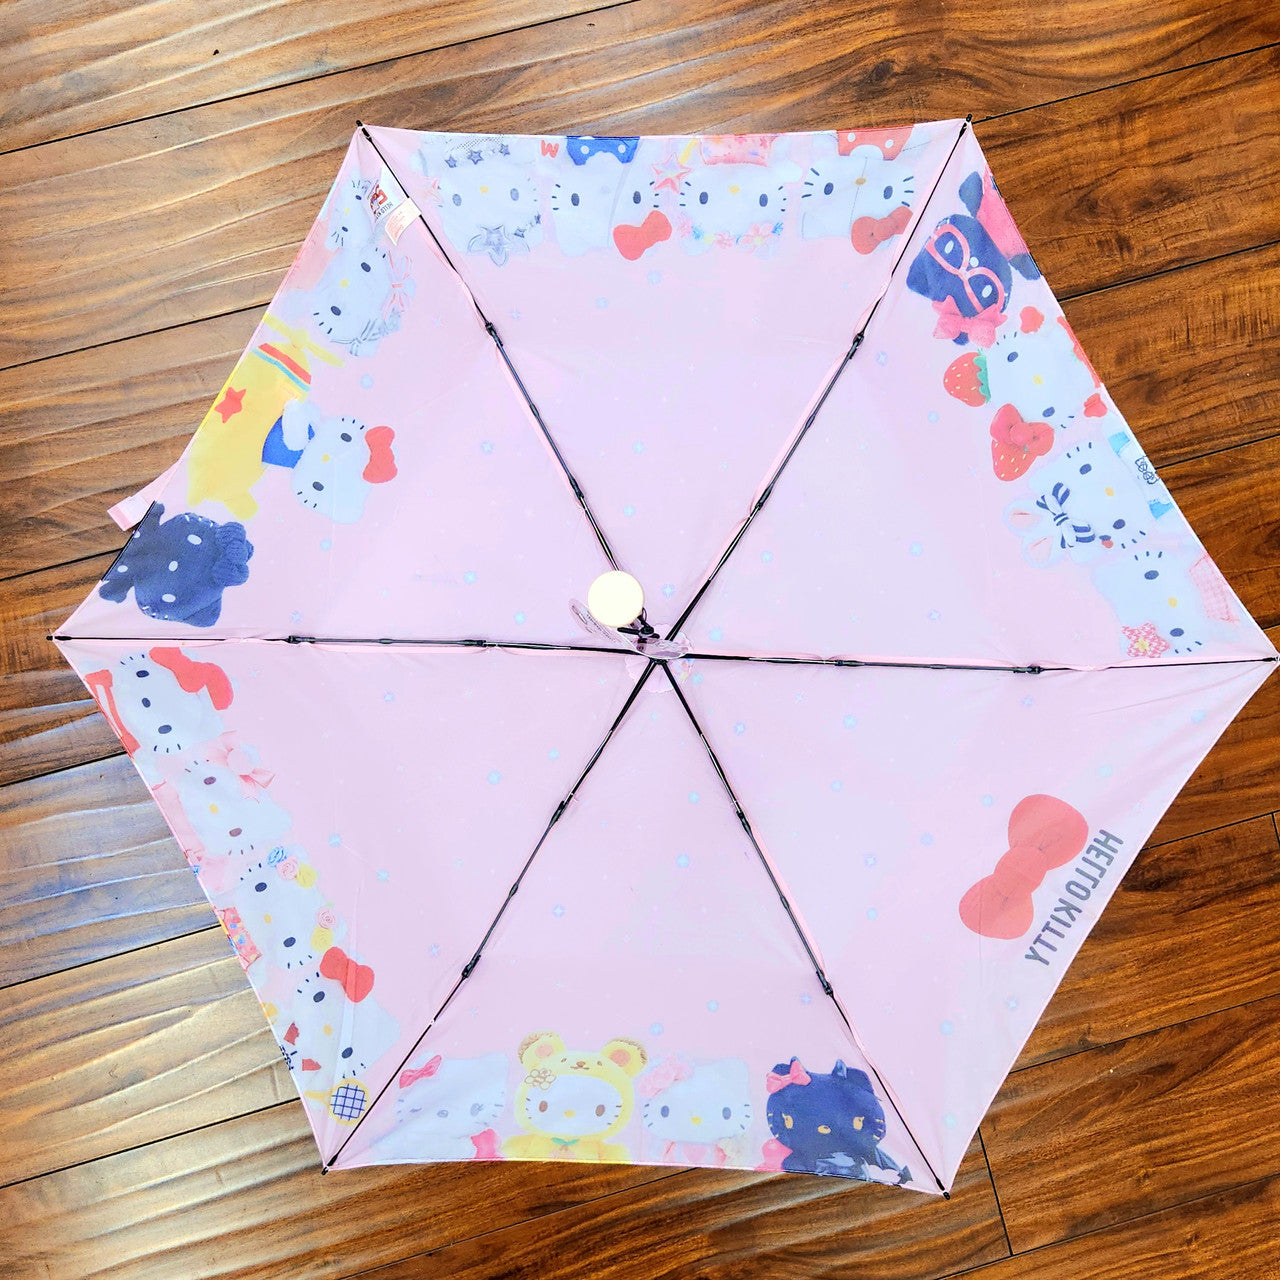 Hello Kitty 50th Anniversay OVER THE YEARS Foldable Umbrella